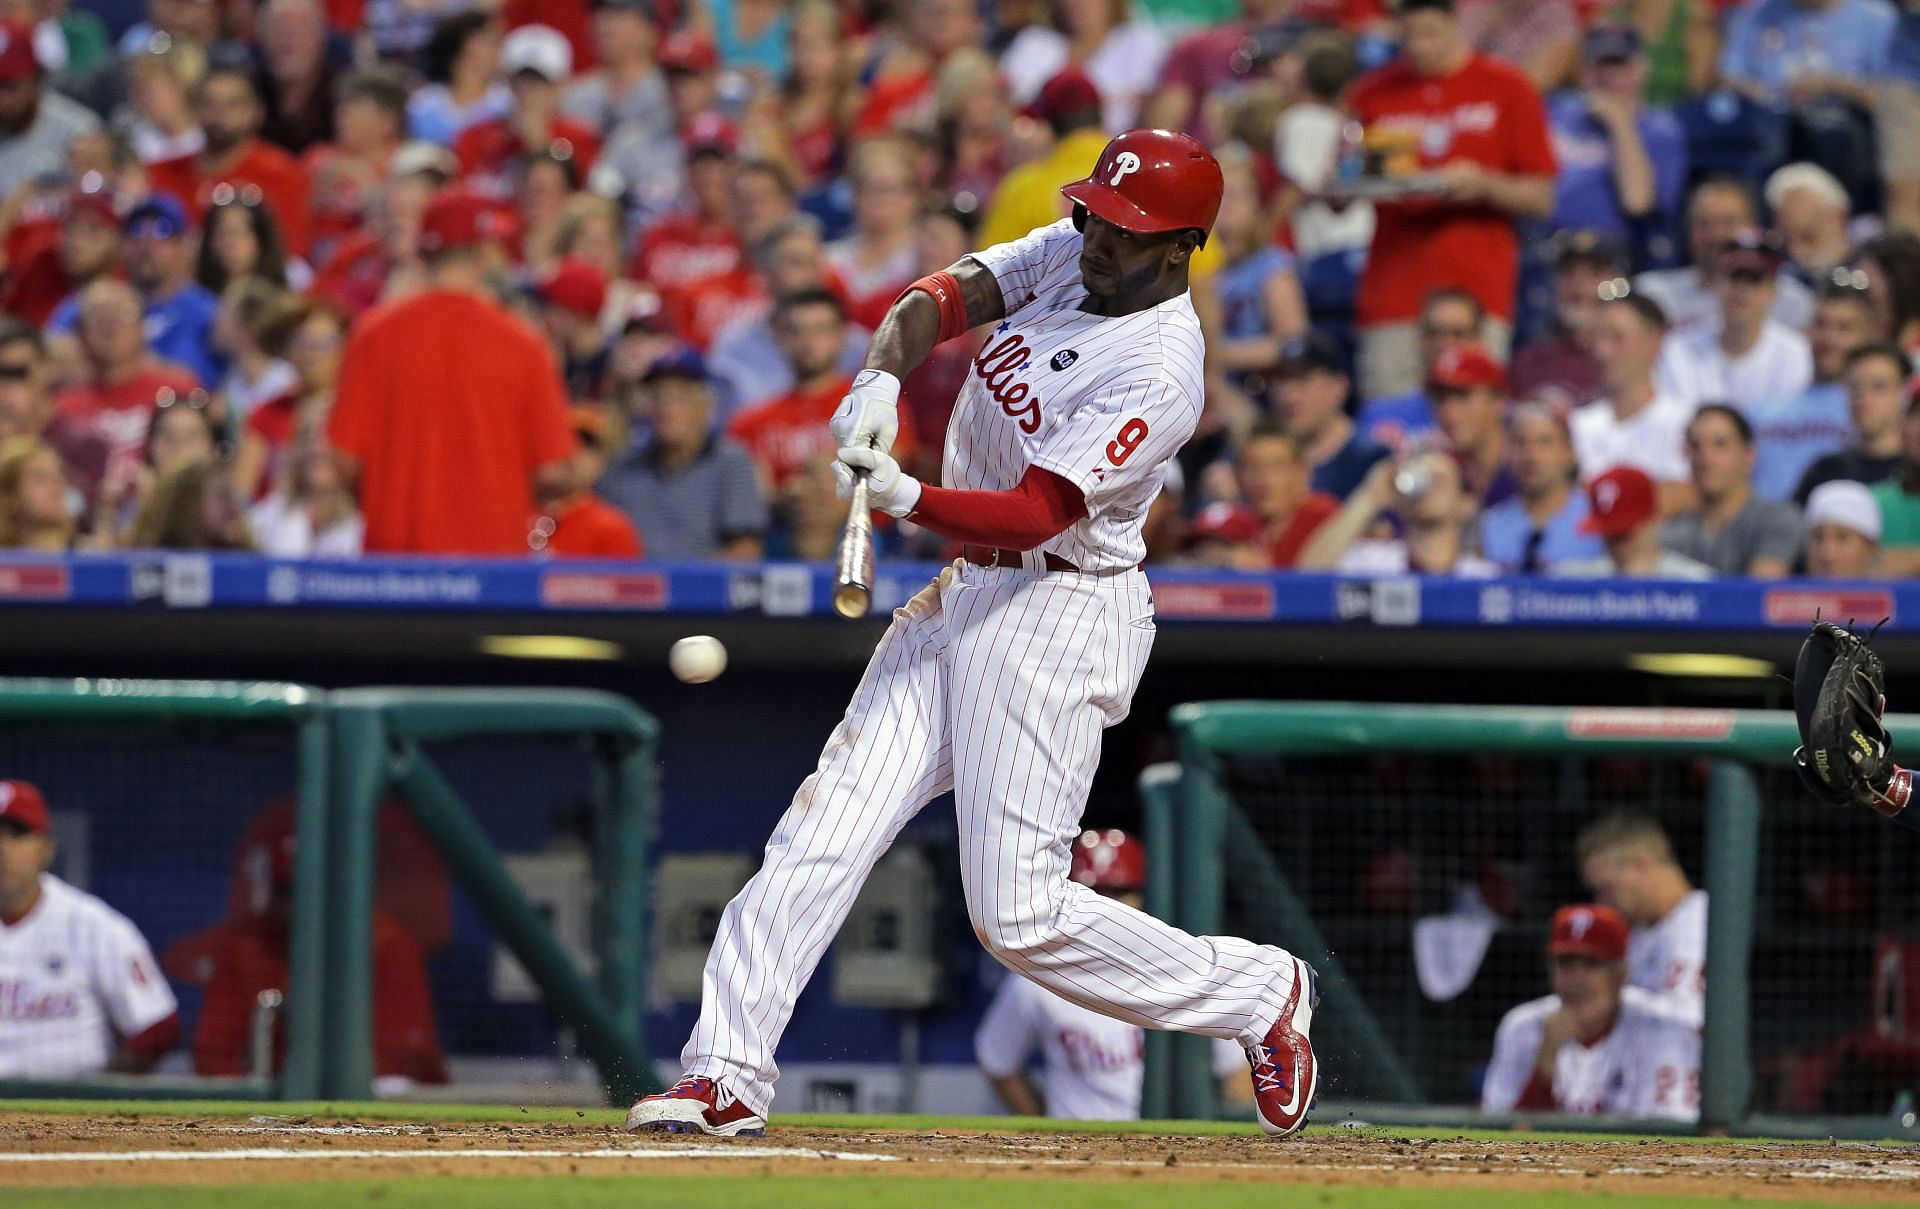 Domonic Brown #9 of the Philadelphia Phillies bats during a game against the Atlanta Braves at Citizens Bank Park on July 31, 2015